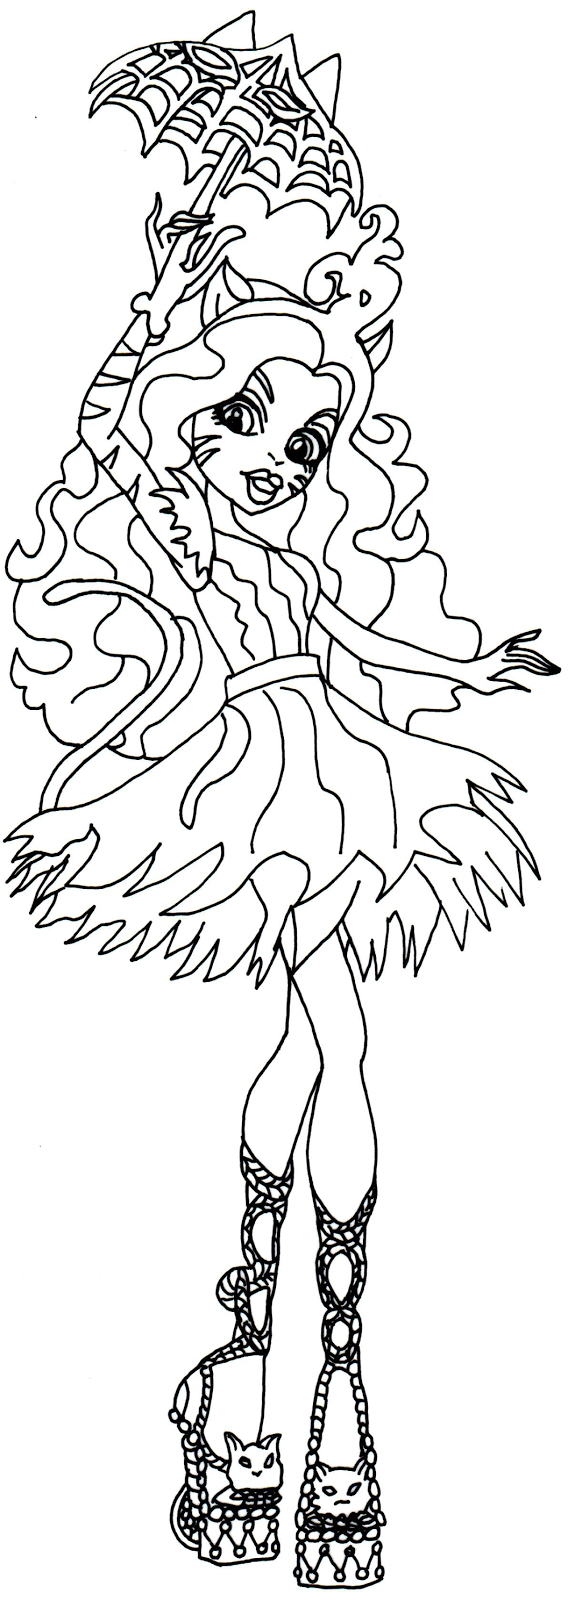 Free Printable Monster High Coloring Pages: Toralei Stripe Freak ...